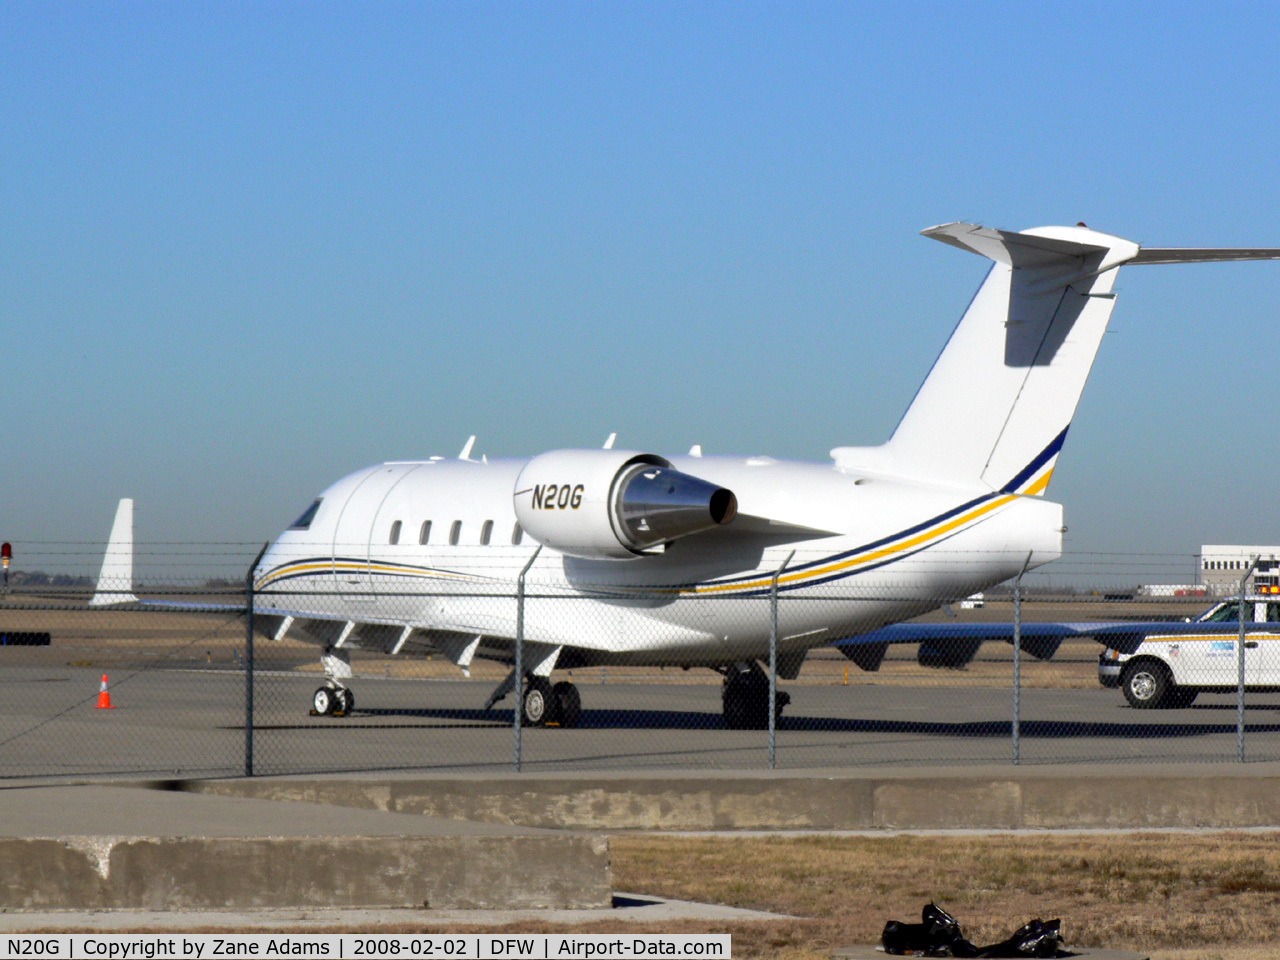 N20G, 1993 Canadair Challenger 601-3R (CL-600-2B16) C/N 5136, On the General Aviation Ramp at DFW